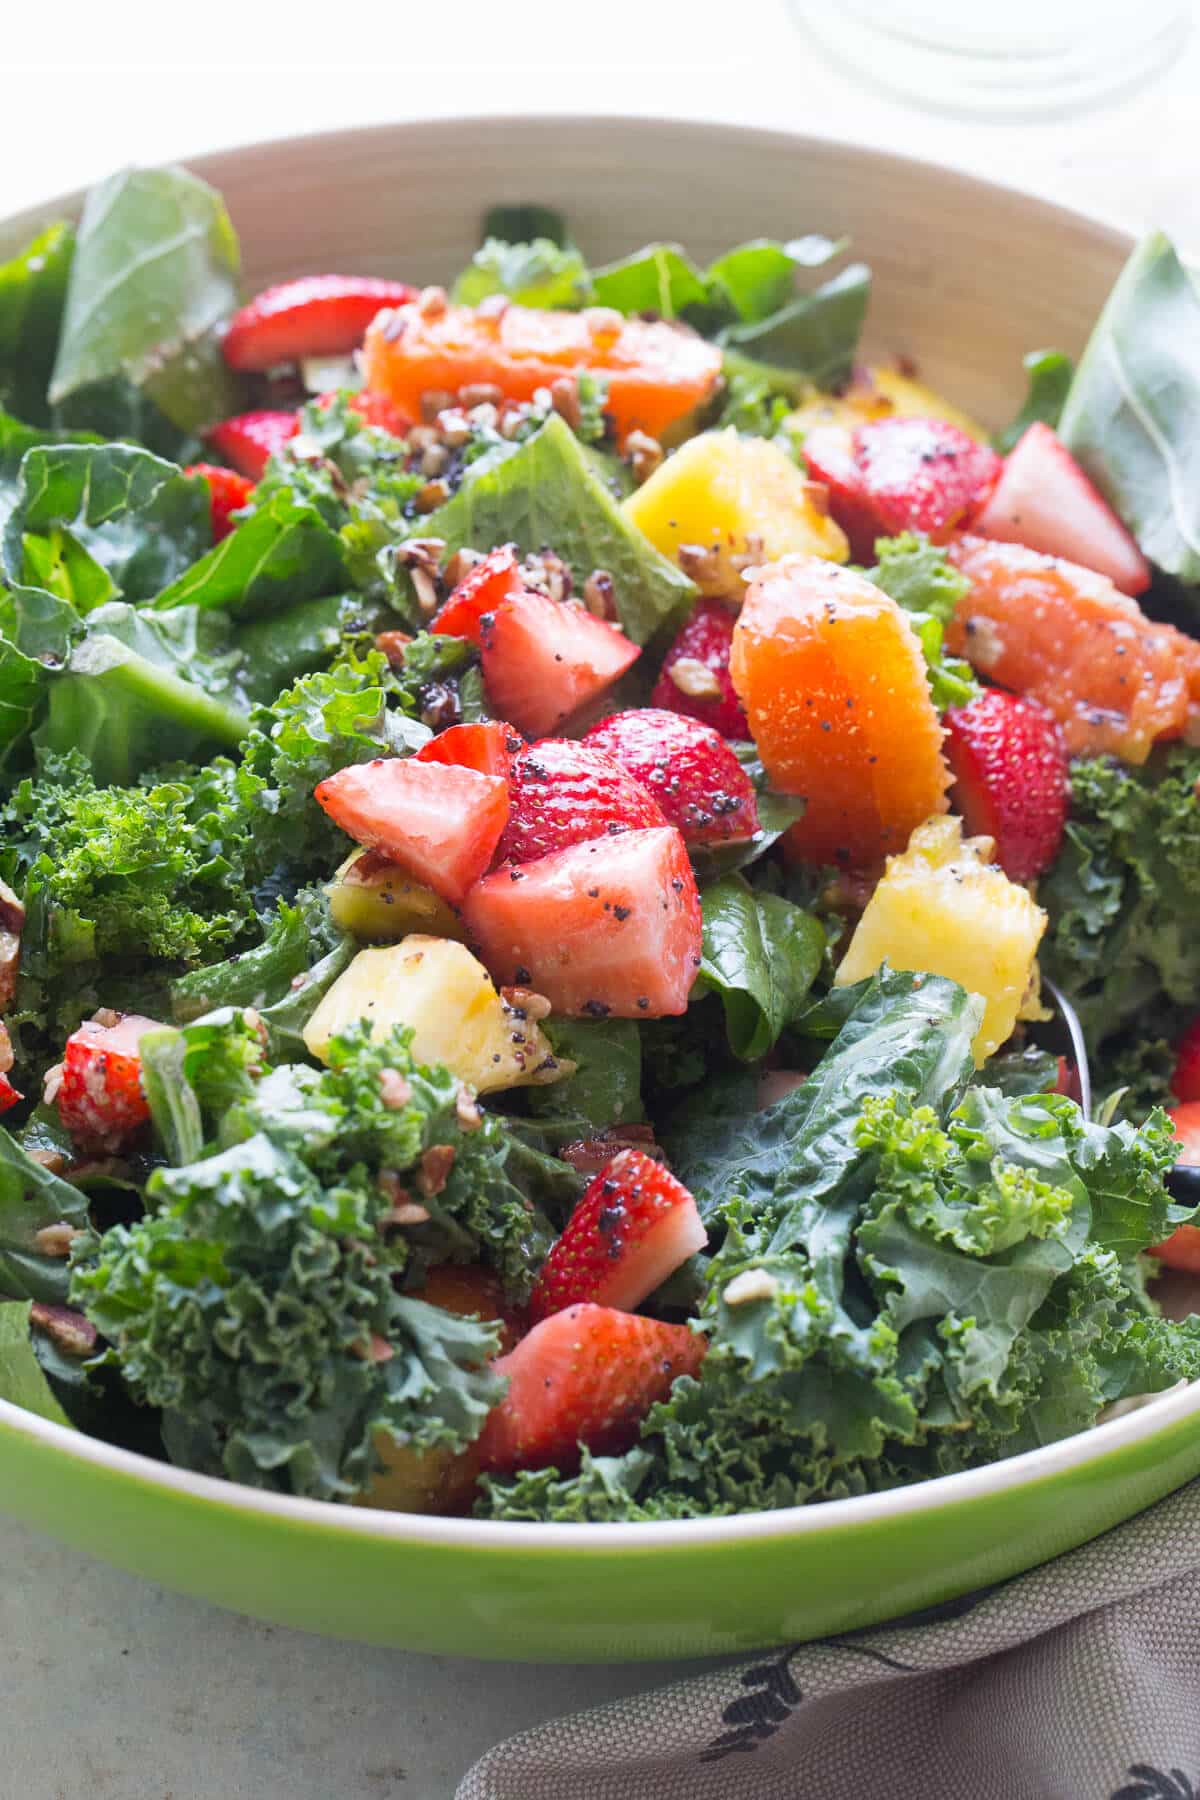 Love fresh flavors? This salad has lots of fresh citrus fruits sprinkled among healthy greens!